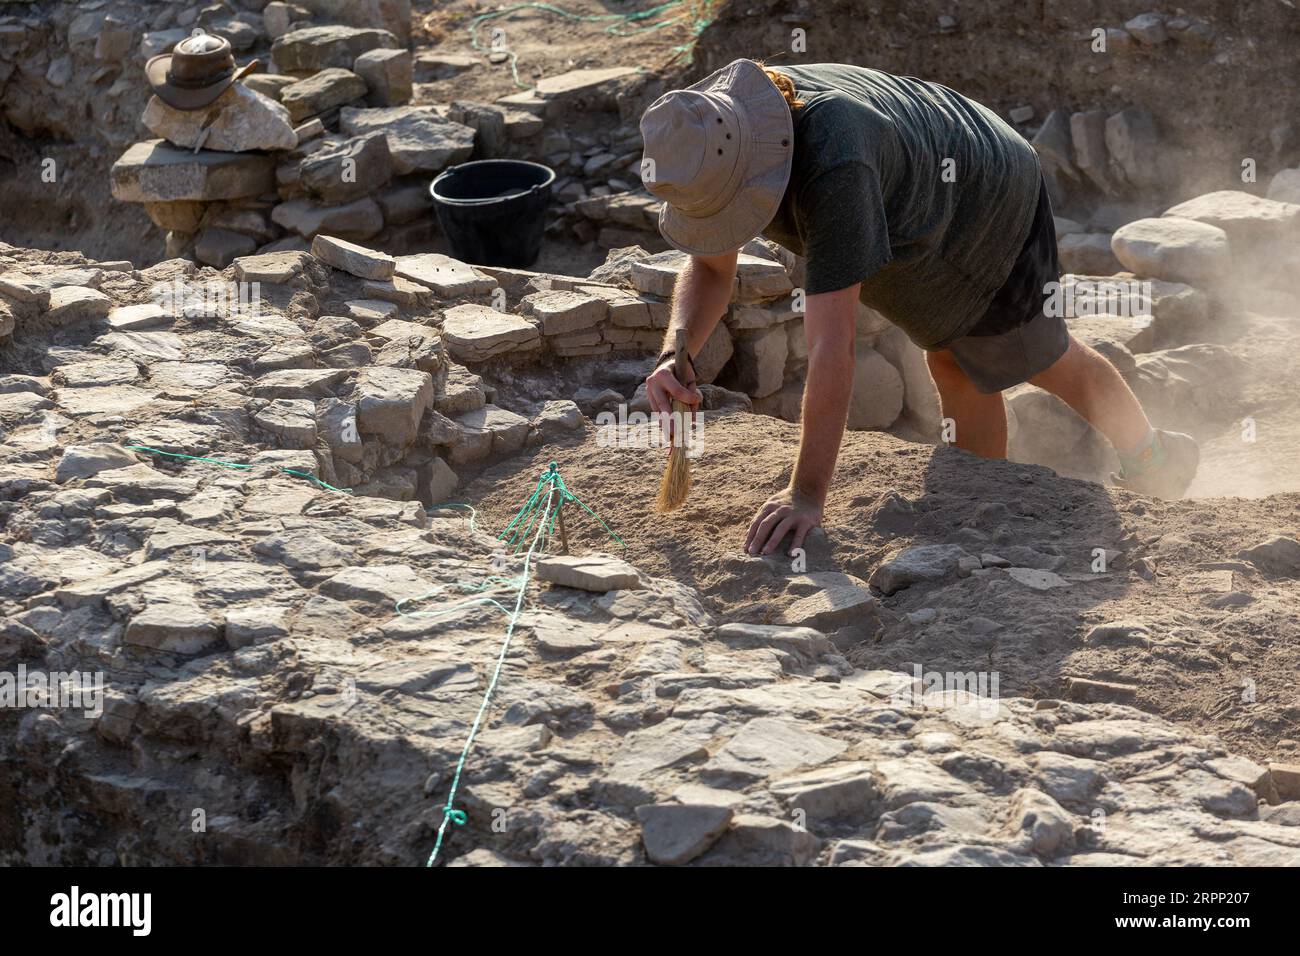 Archaeologists excavate at the archaeological site Stobi. Stock Photo